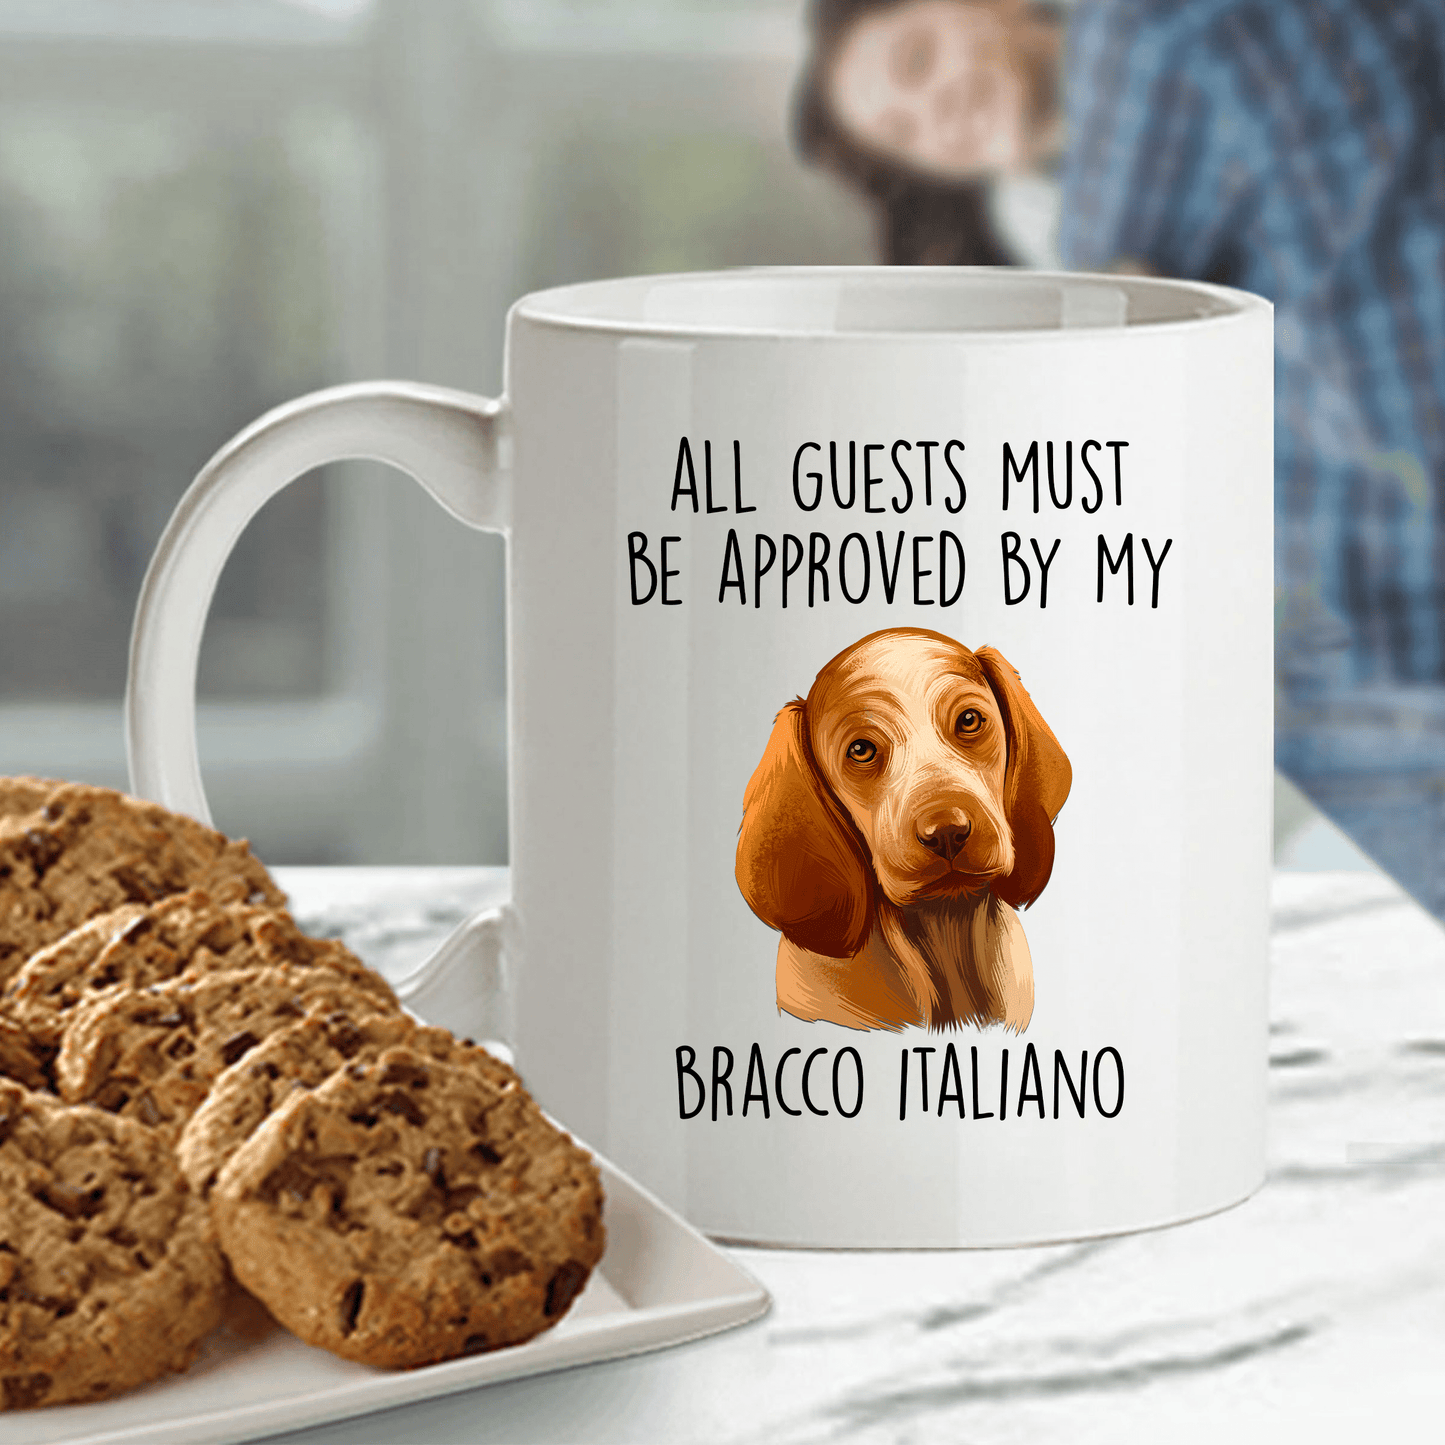 Bracco Italiano - All Guests Must be Approved - Funny Dog Ceramic Coffee Mug